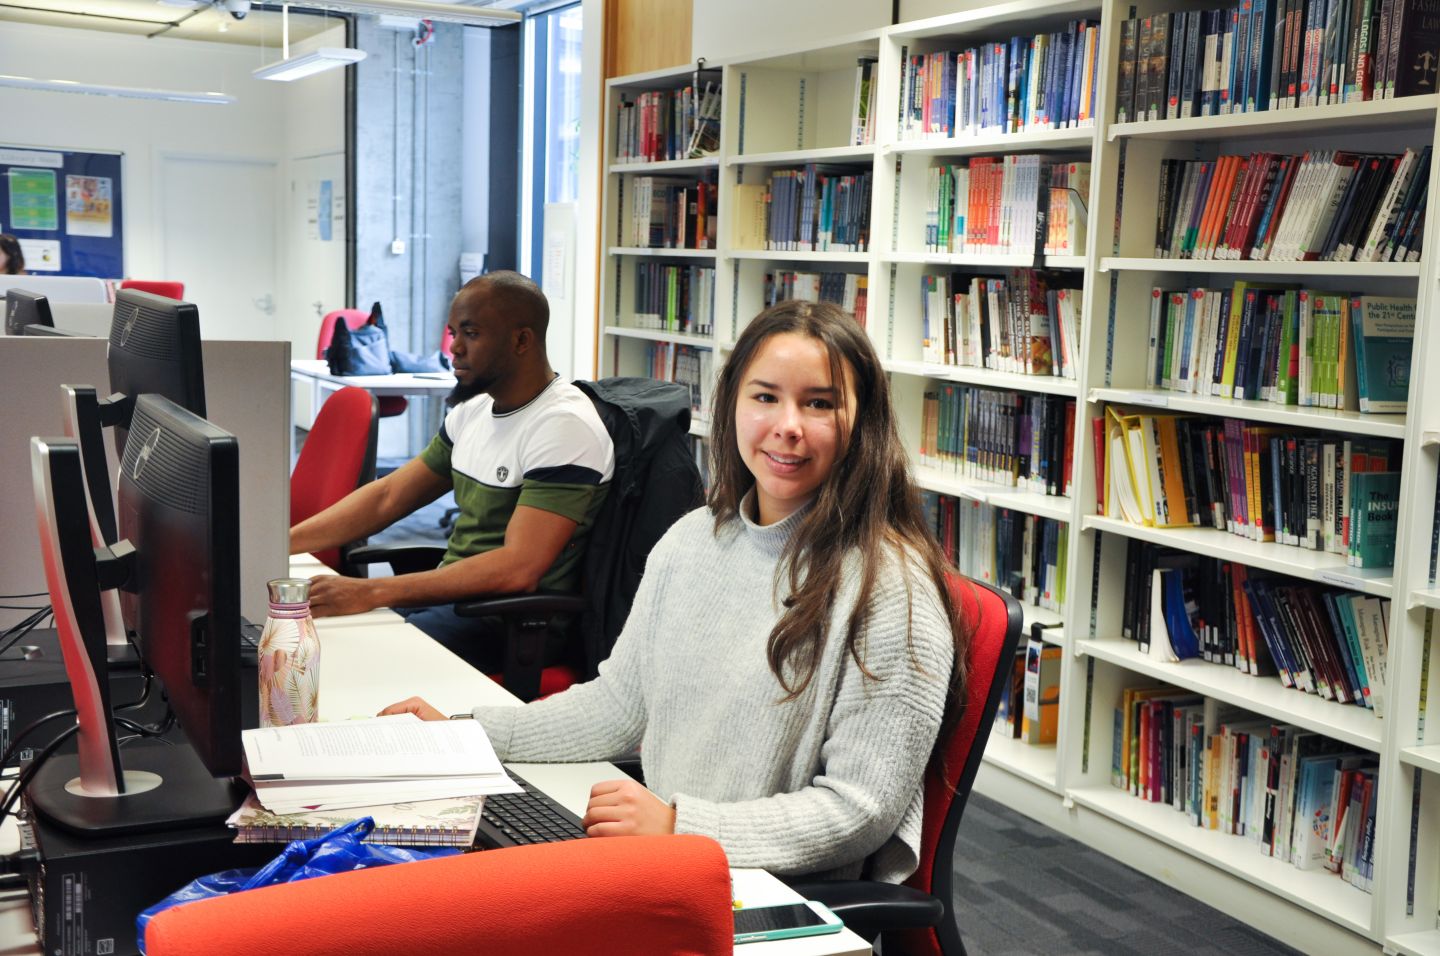 GCU London students in the library on campus in March 2020, studying while using the computers